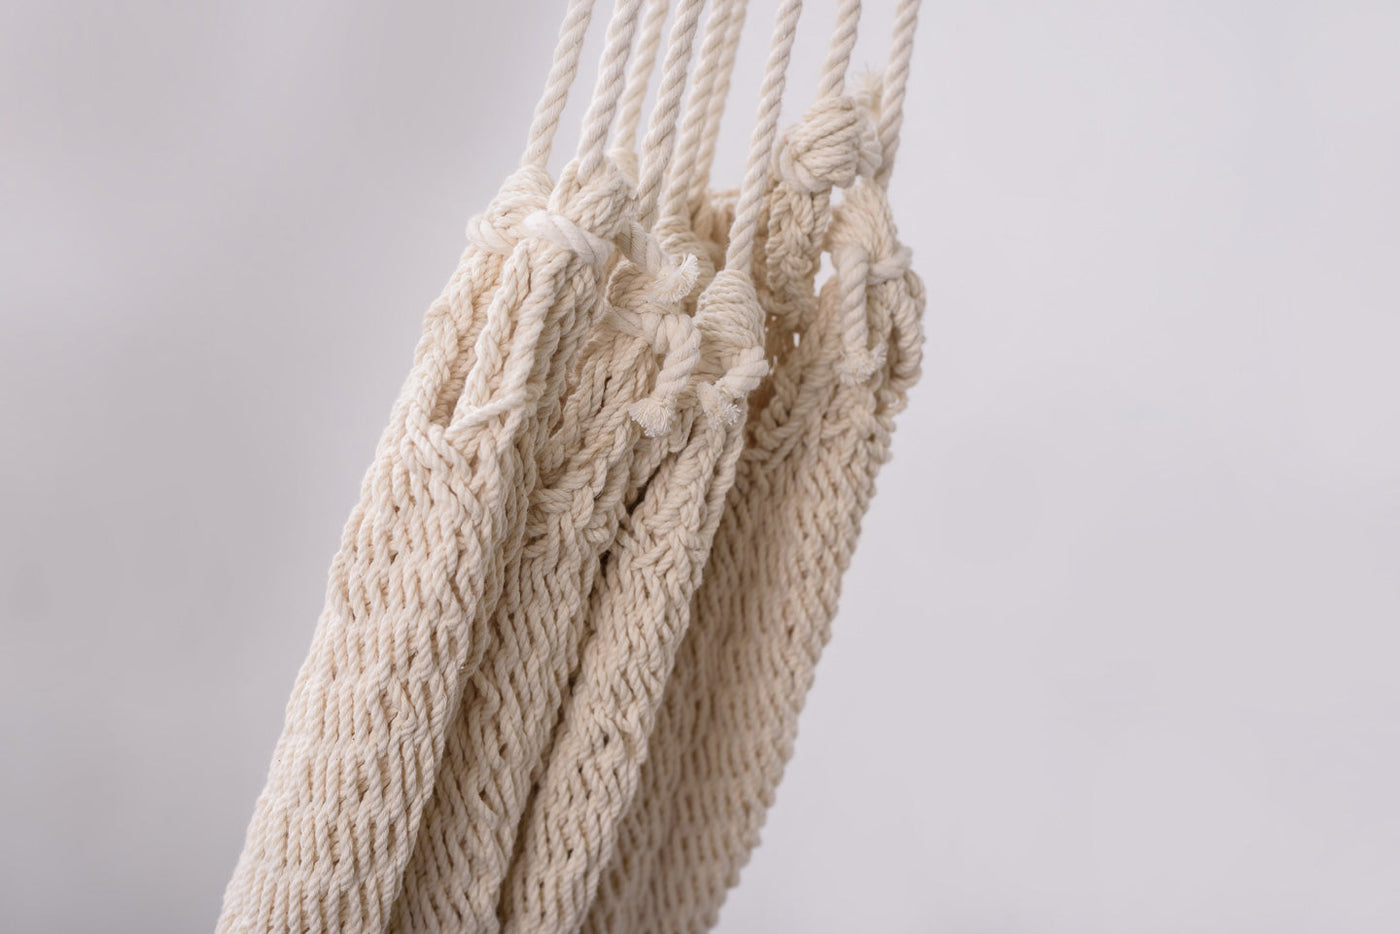 Deluxe Natural Cotton Hammock with Rainforest Inspired Tassels